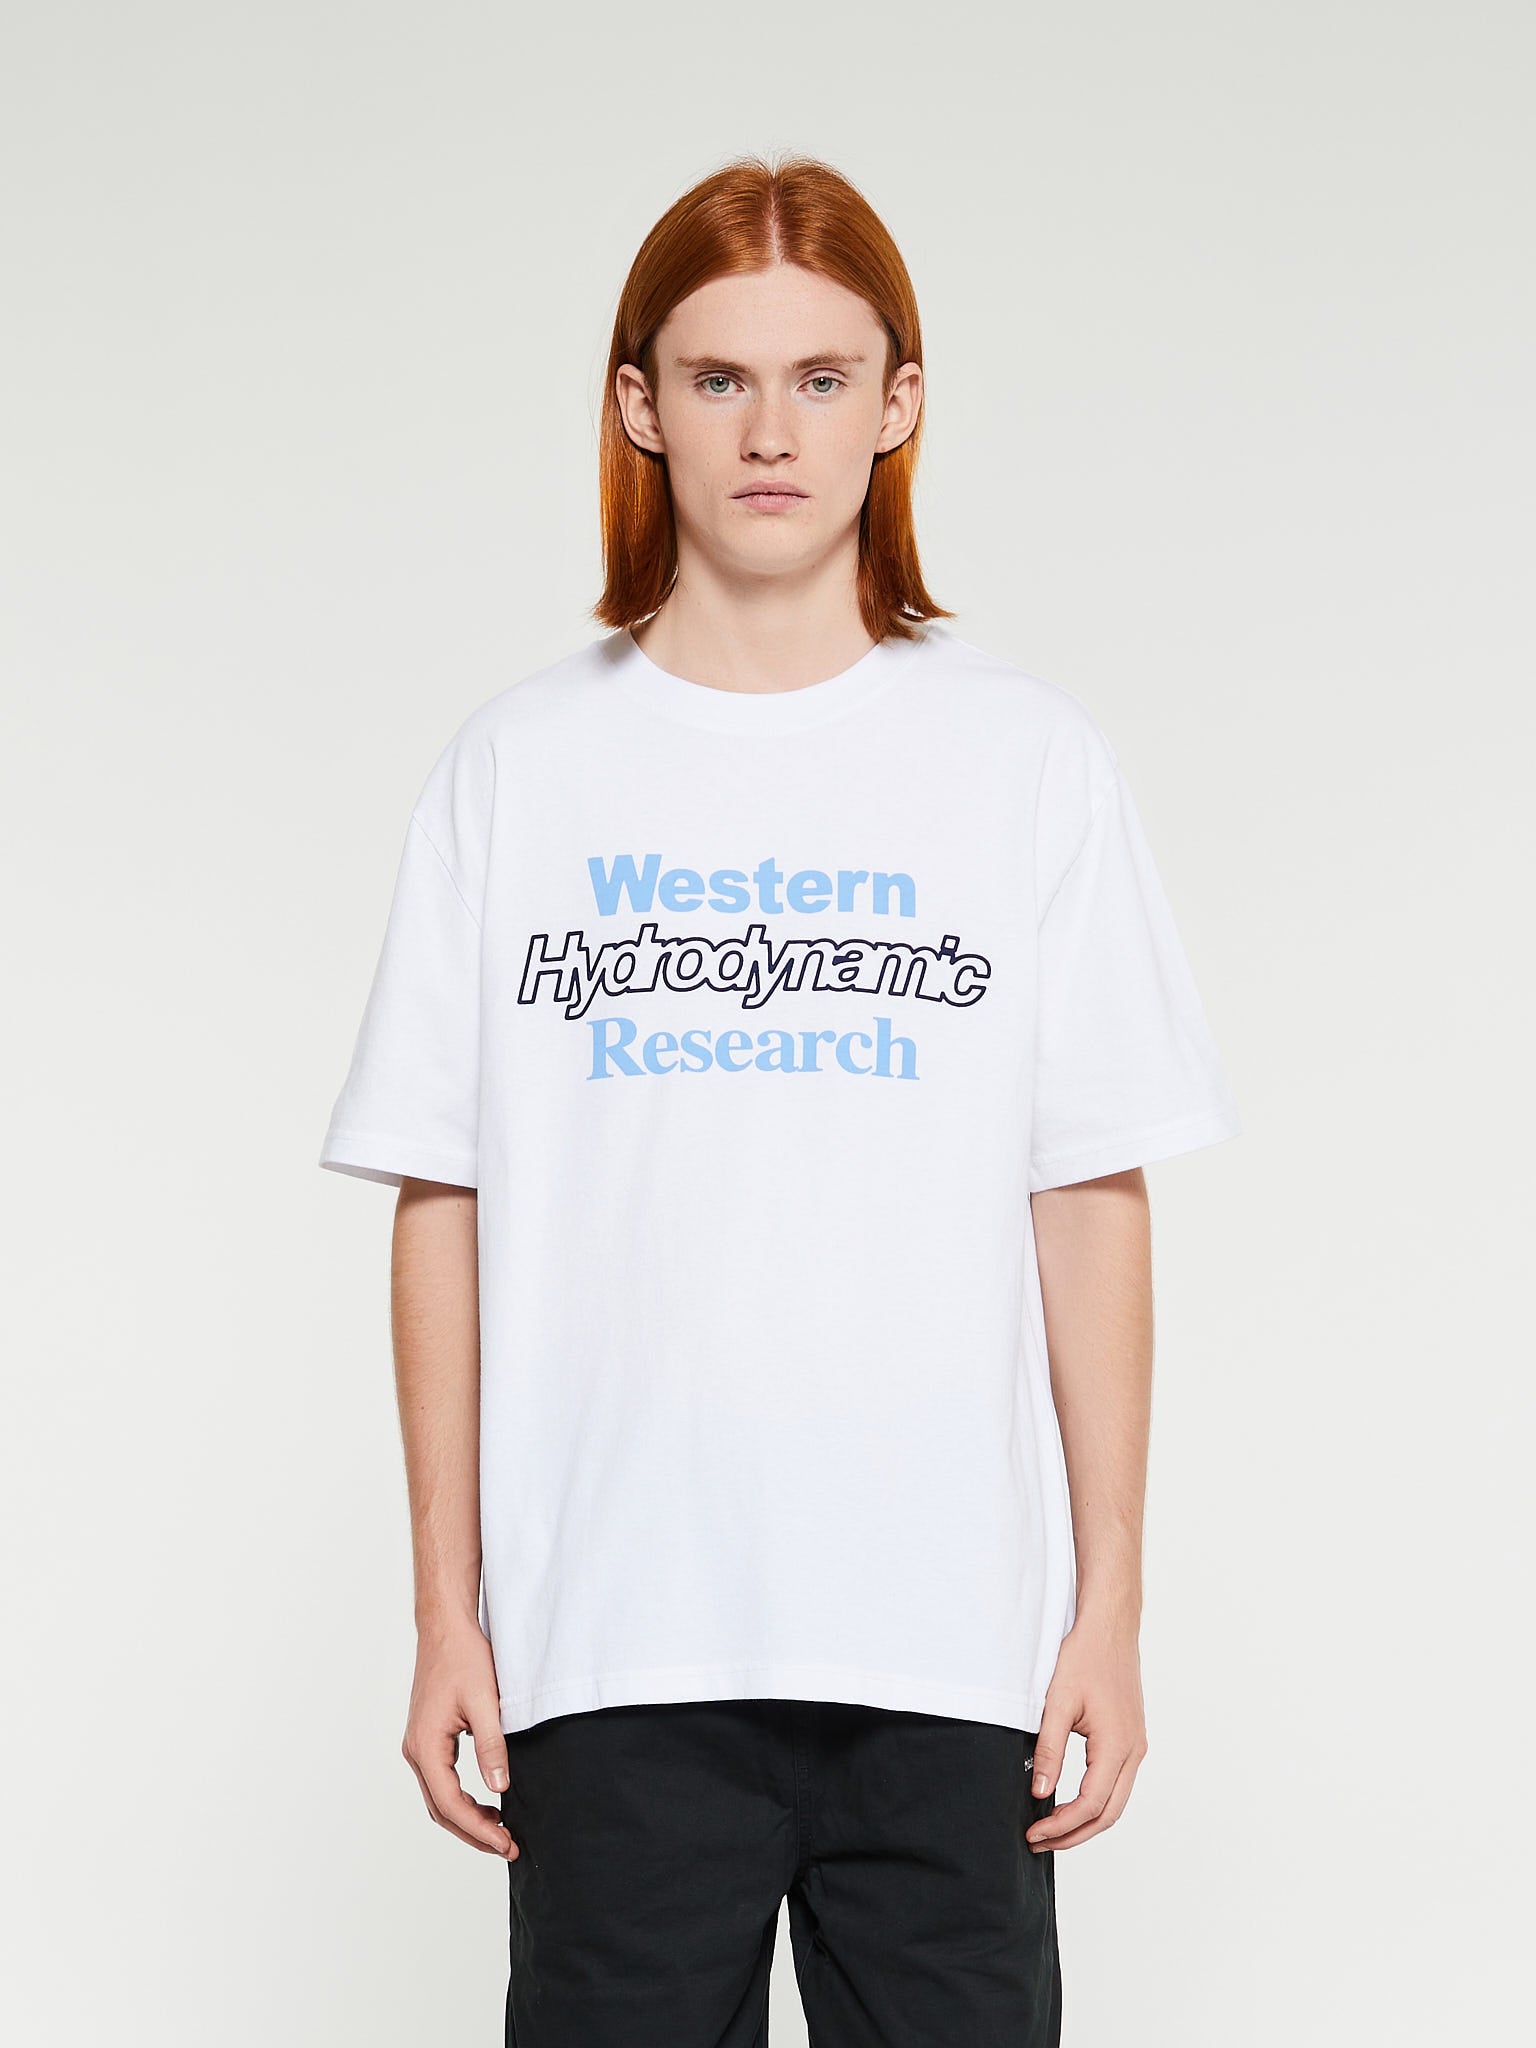 Western Hydrodynamic Research - Wave Runner Tee in White